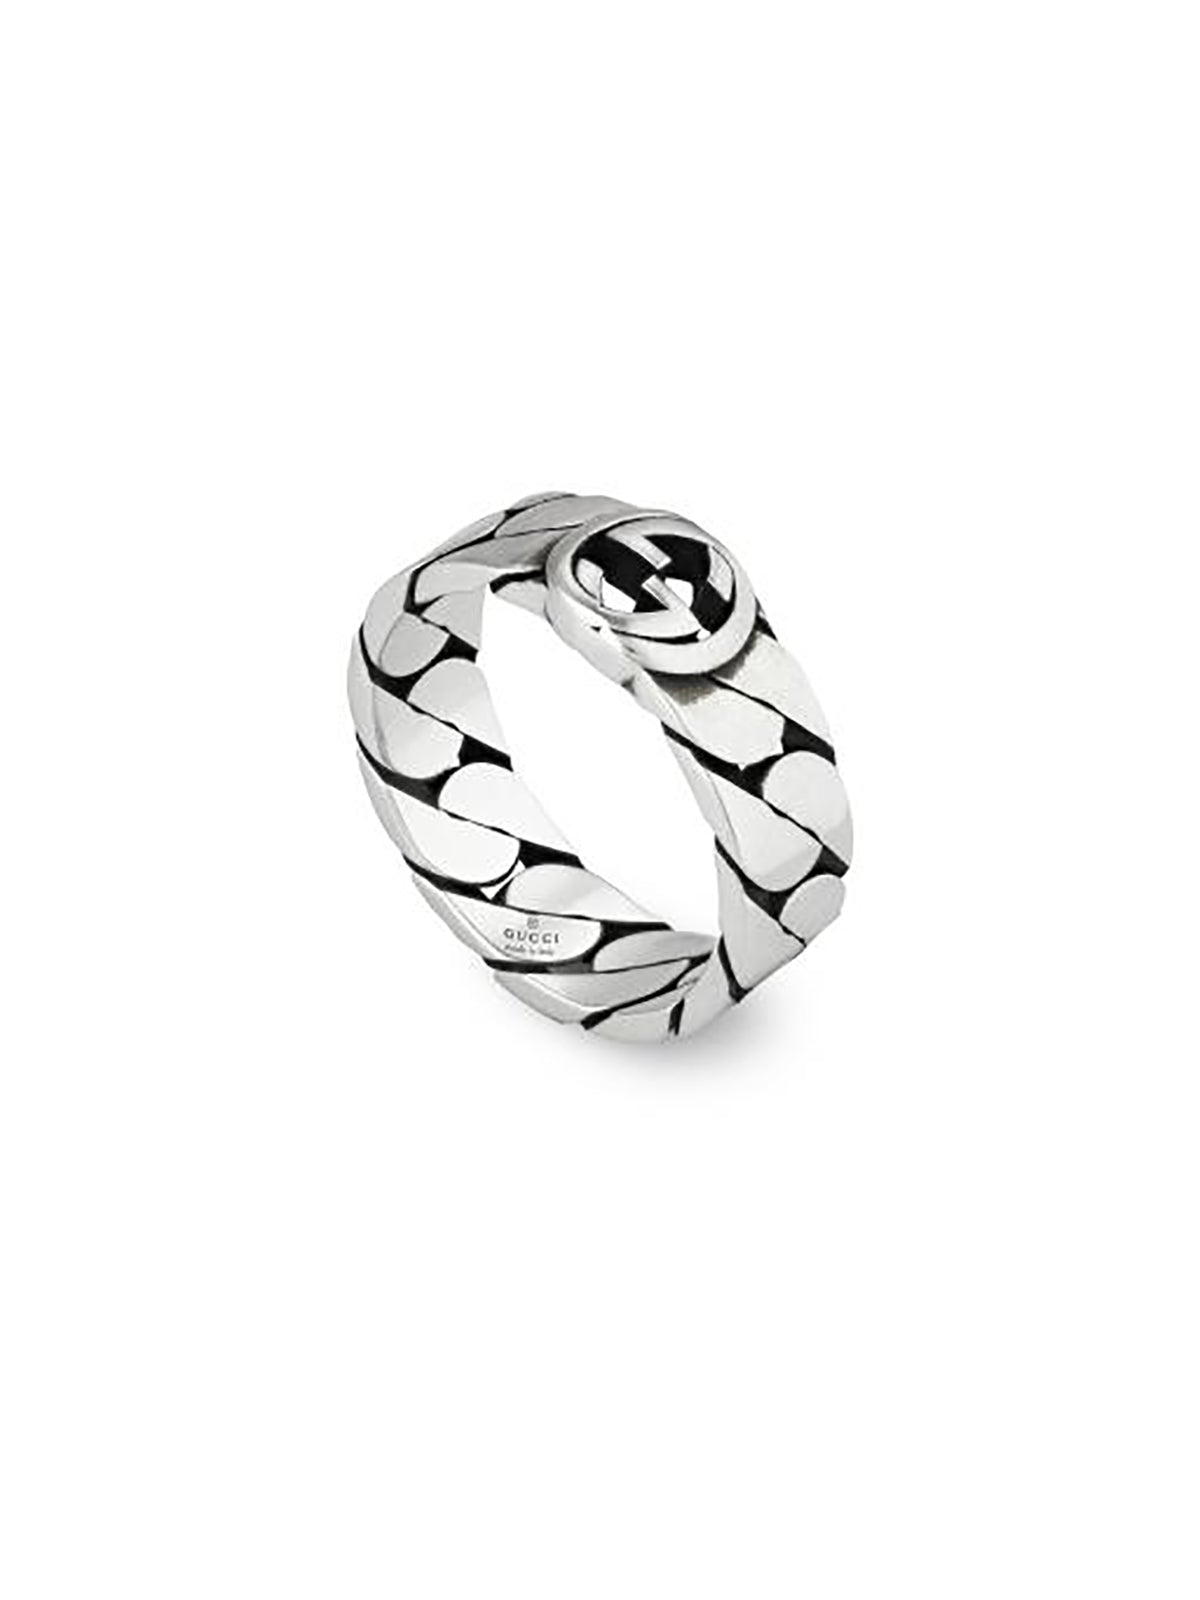 Gucci Interlocking G Ring 6mm in Silver - Size 16